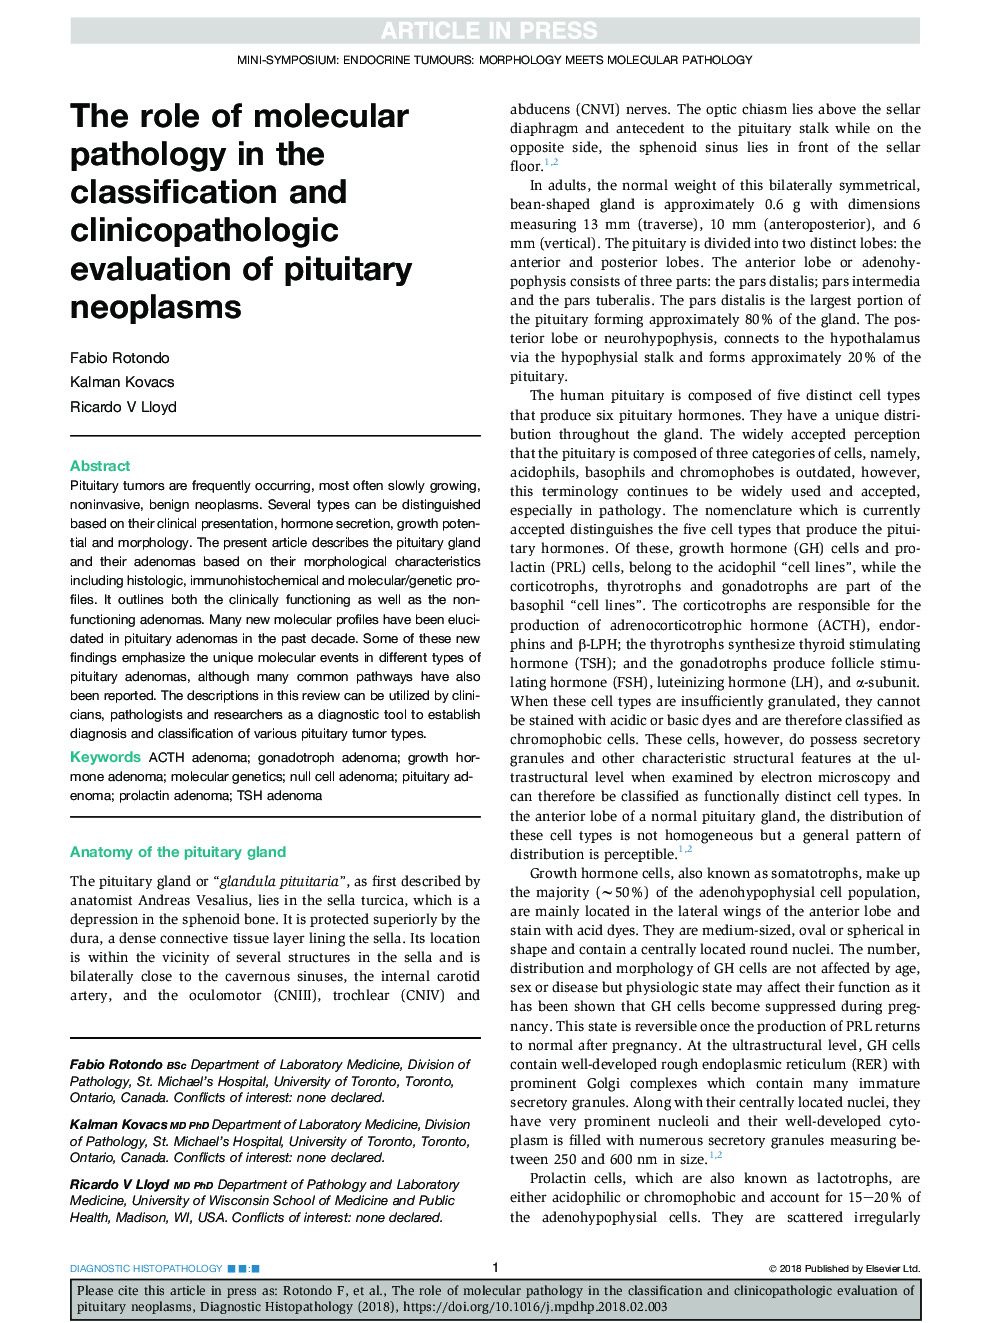 The role of molecular pathology in the classification and clinicopathologic evaluation of pituitary neoplasms